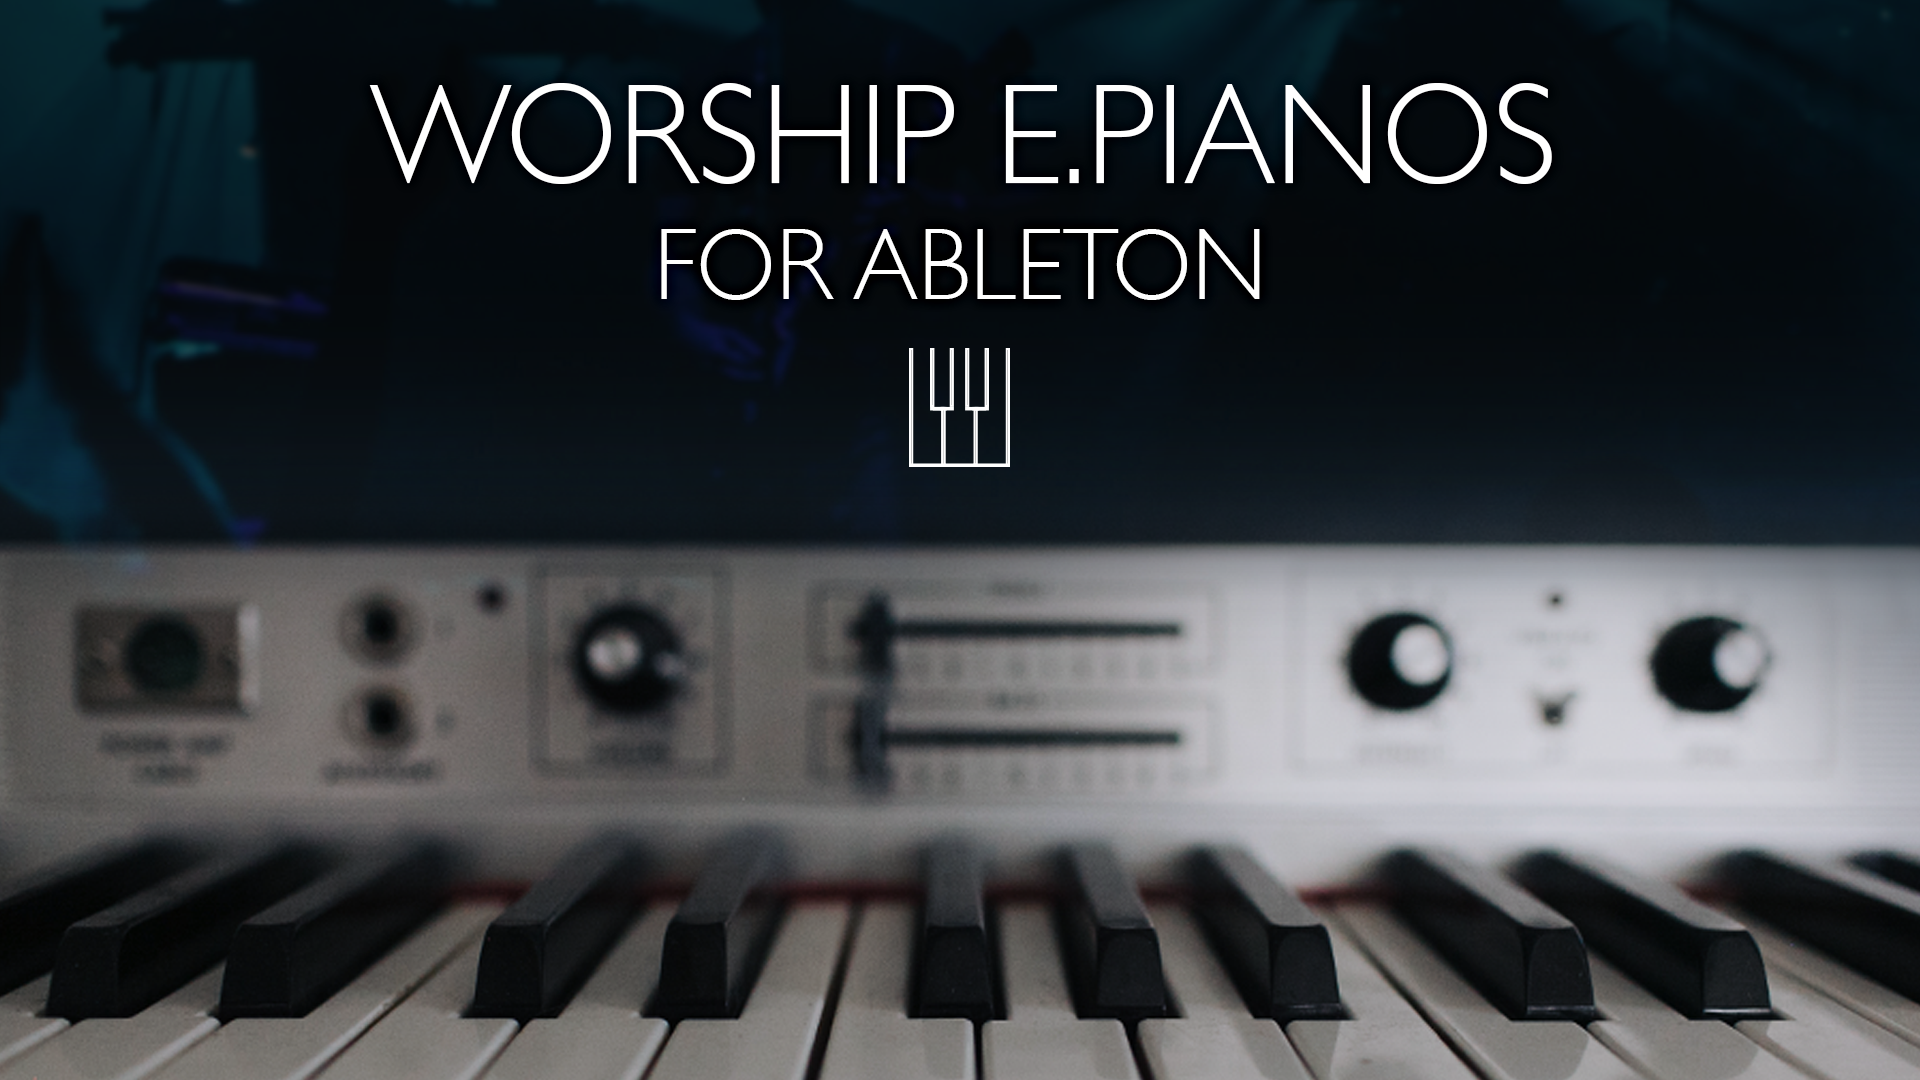 Worship Electric Pianos for Ableton is Now Available!